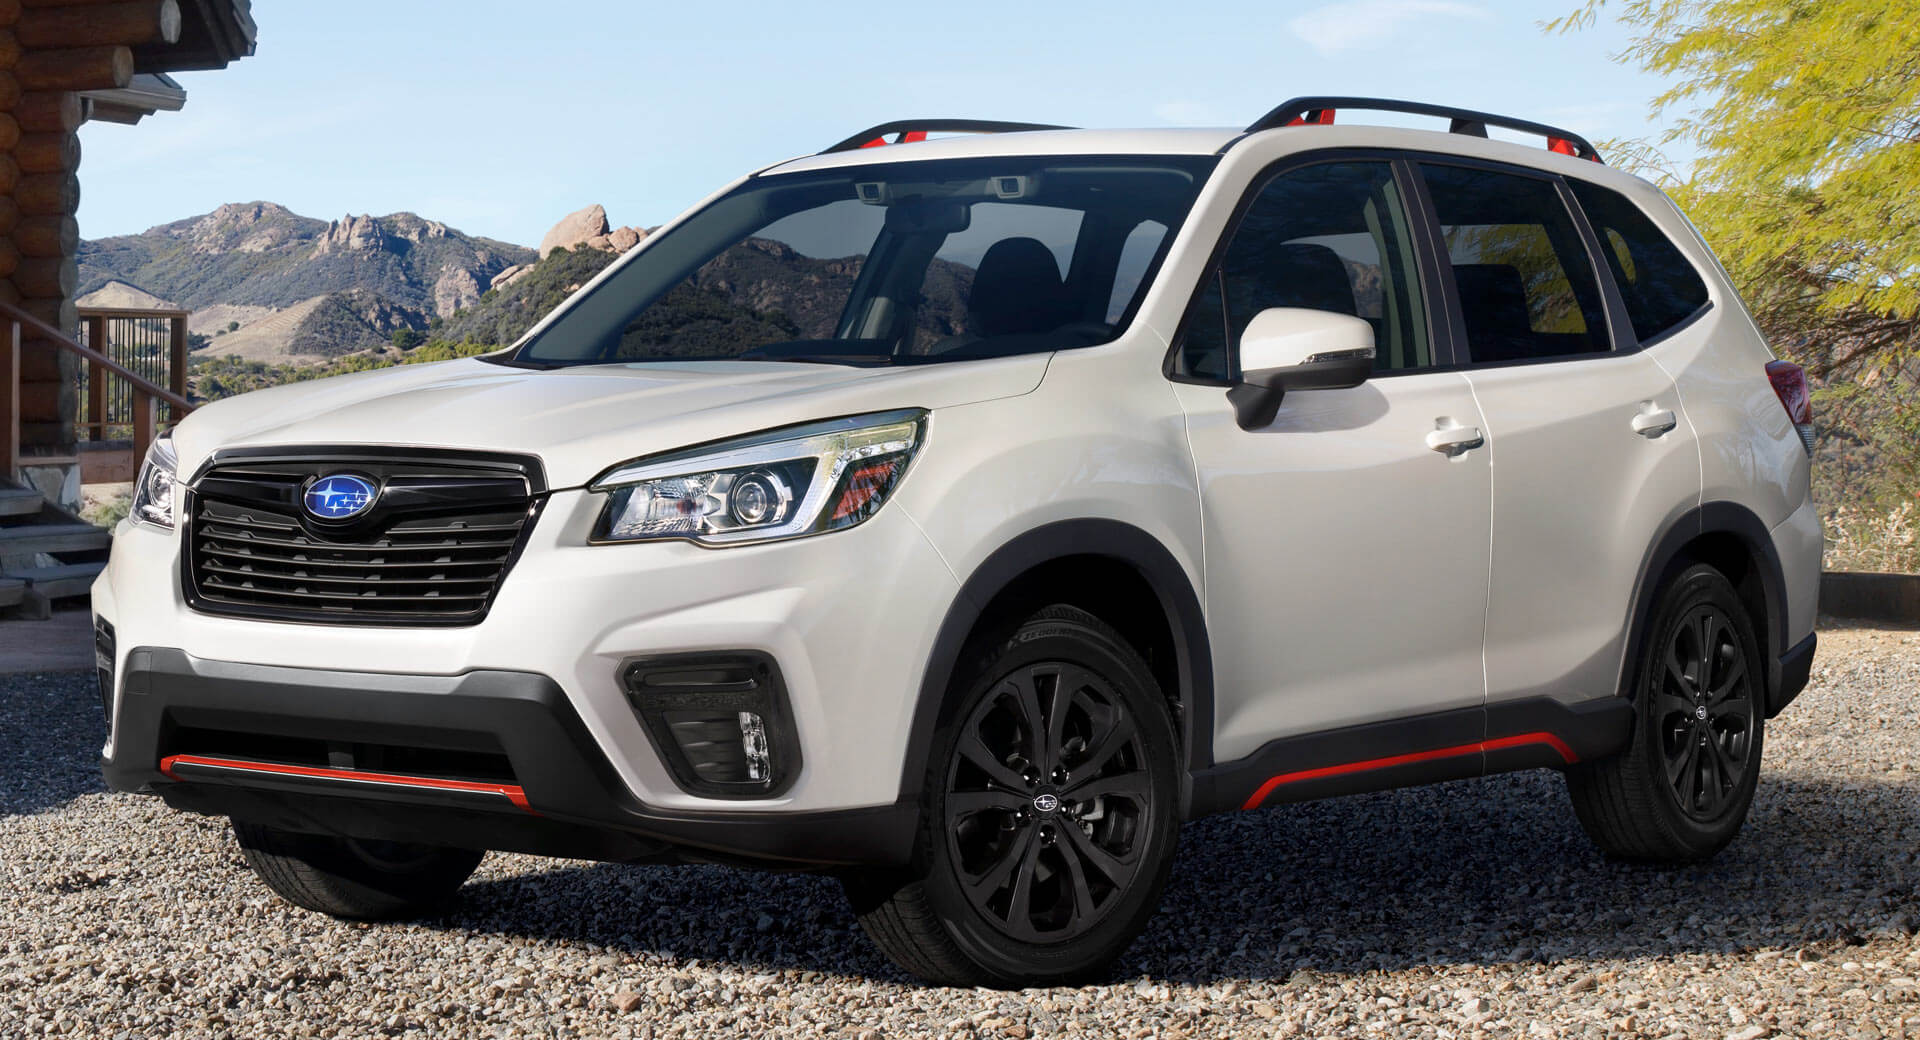 The Redesigned 2019 Subaru Forester Starts At $24,295 ...